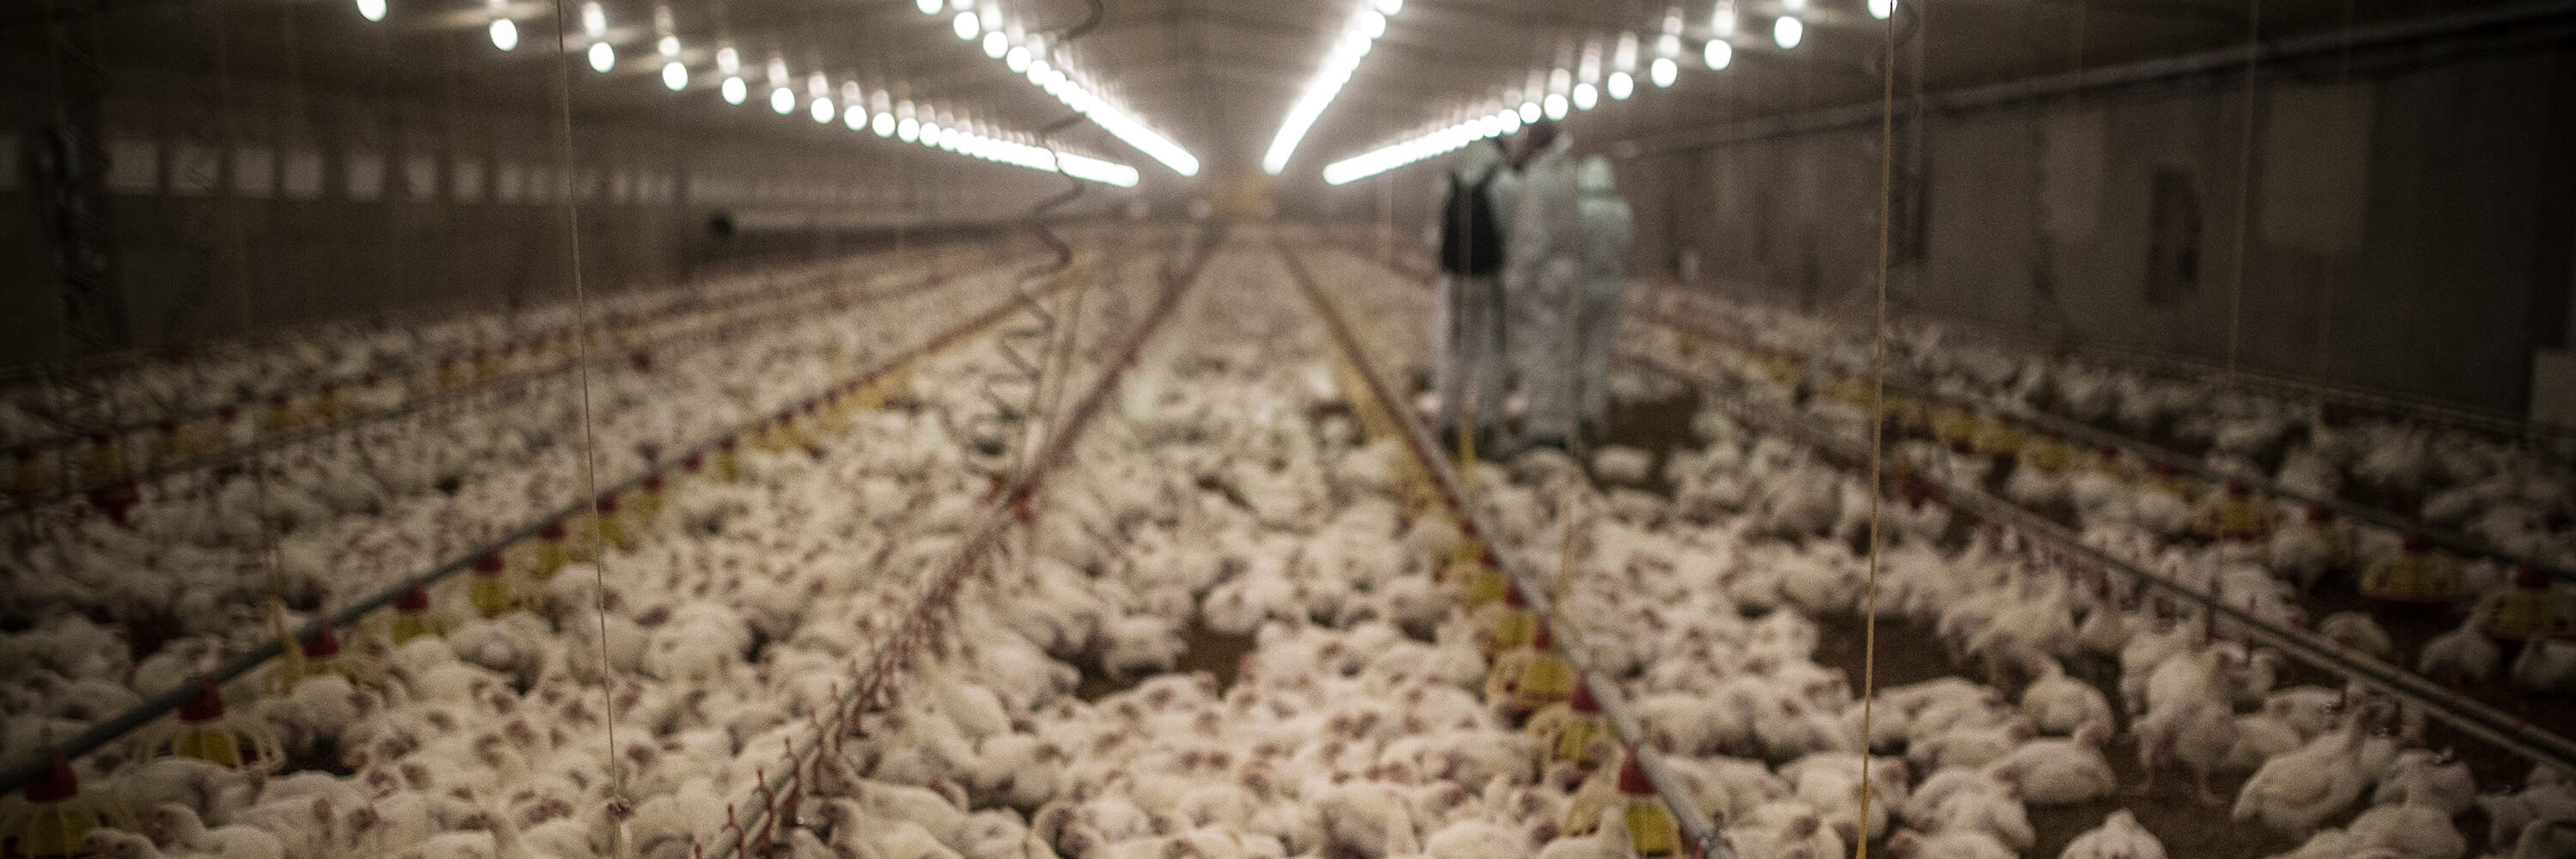 Chickens Suffer on Spanish Factory Farm